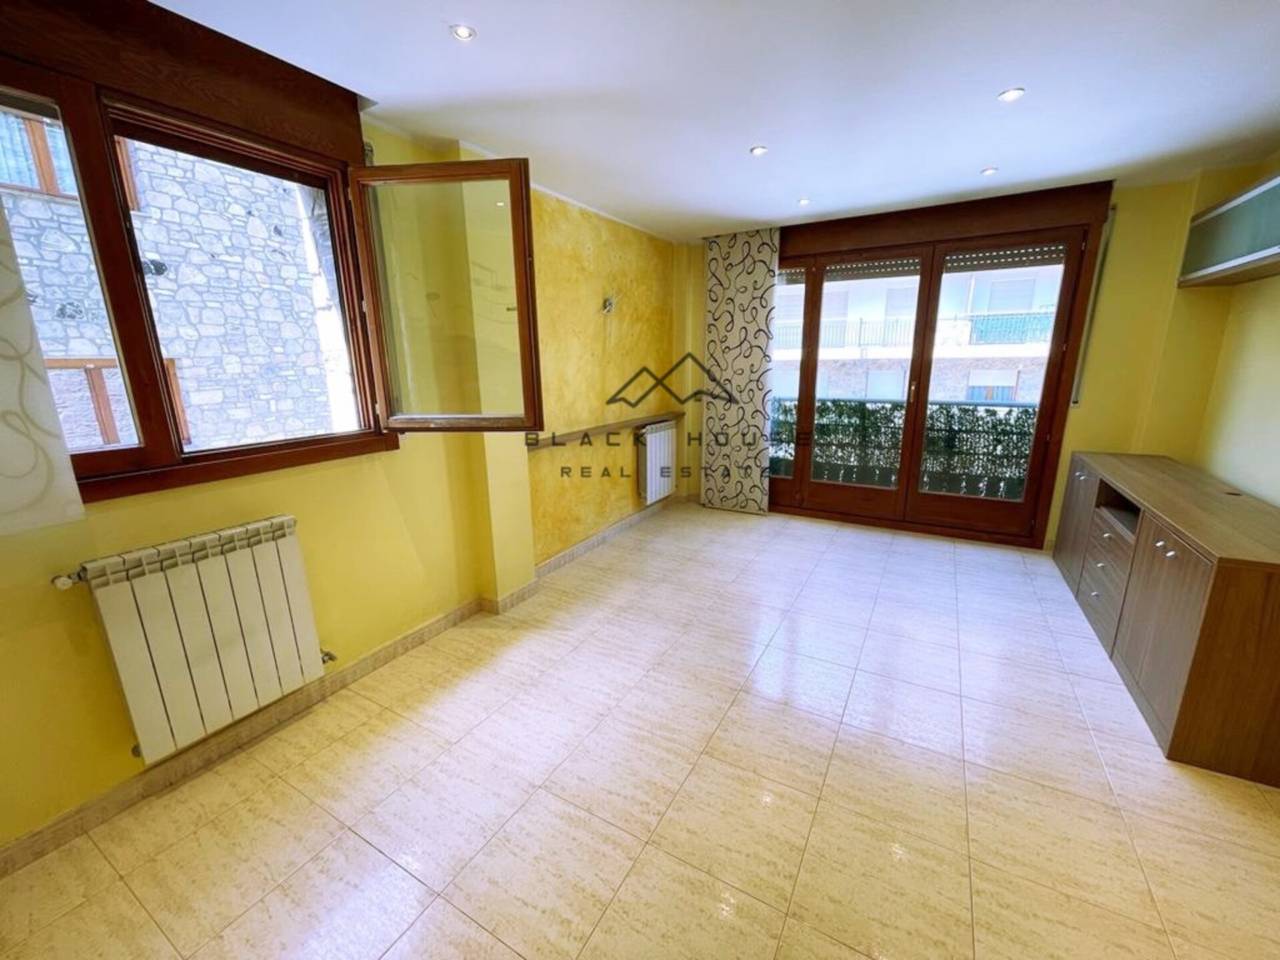 Charming apartment for sale in Encamp